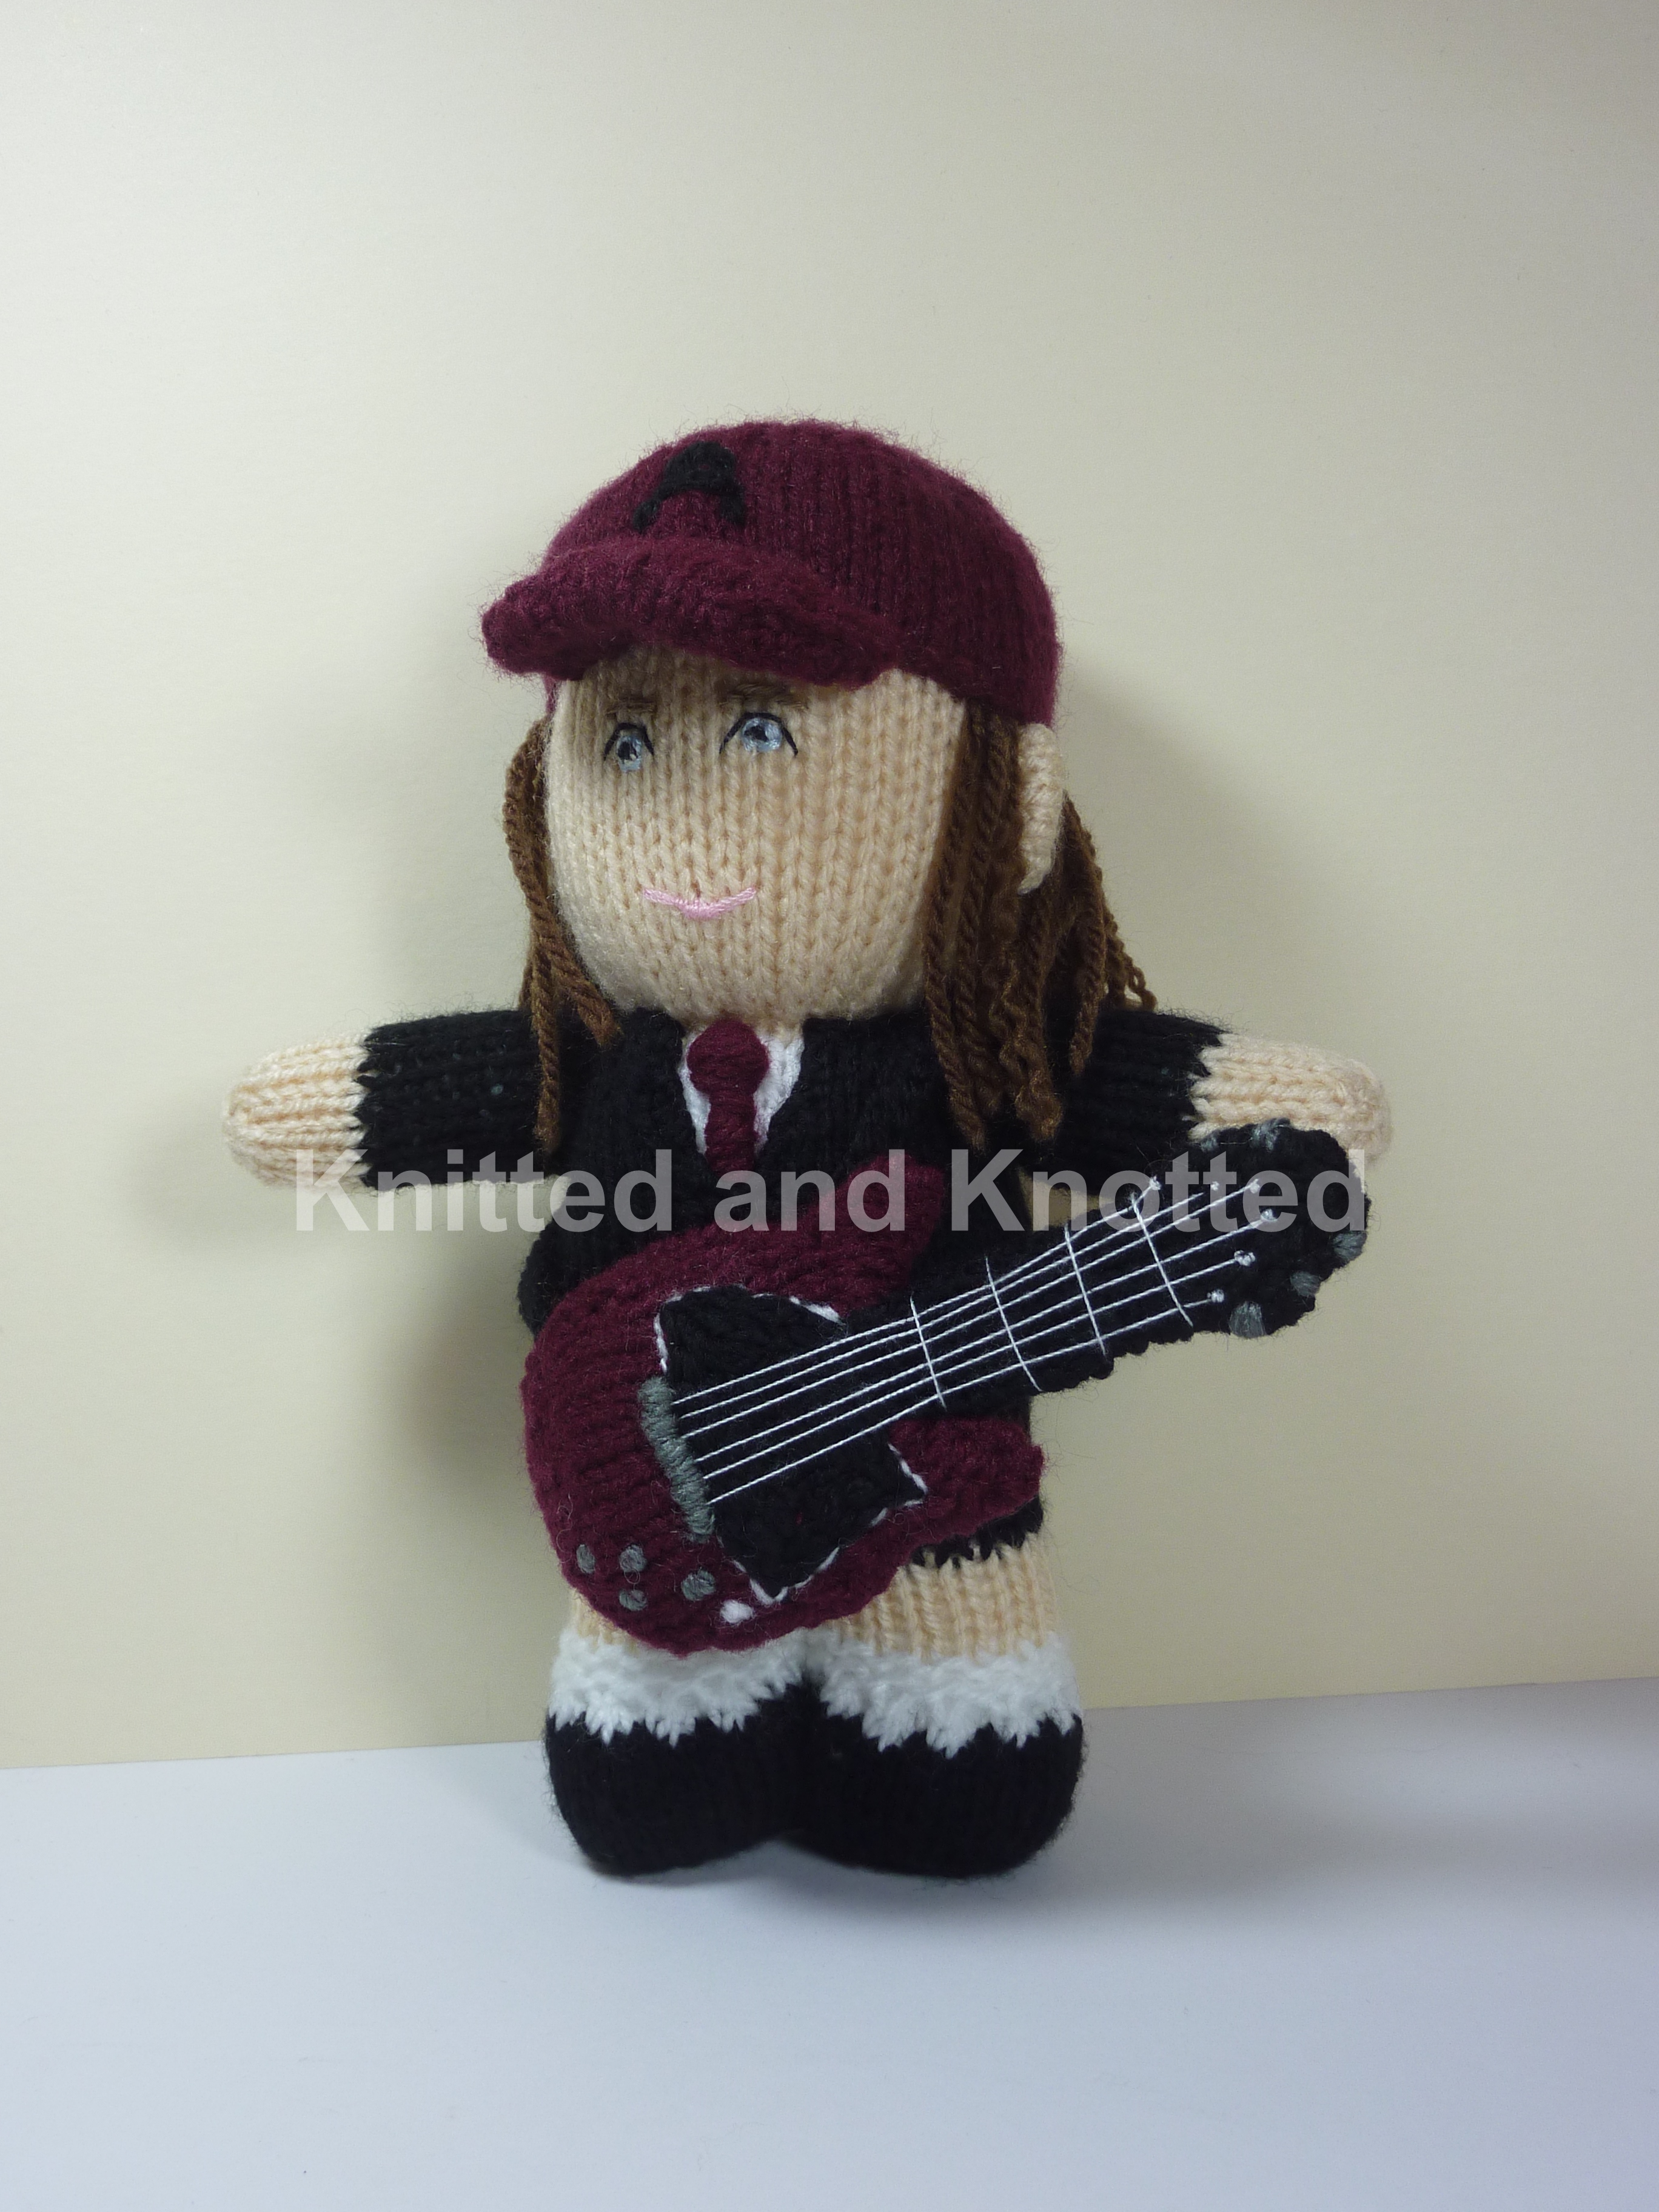 www.knittedandknotted.com